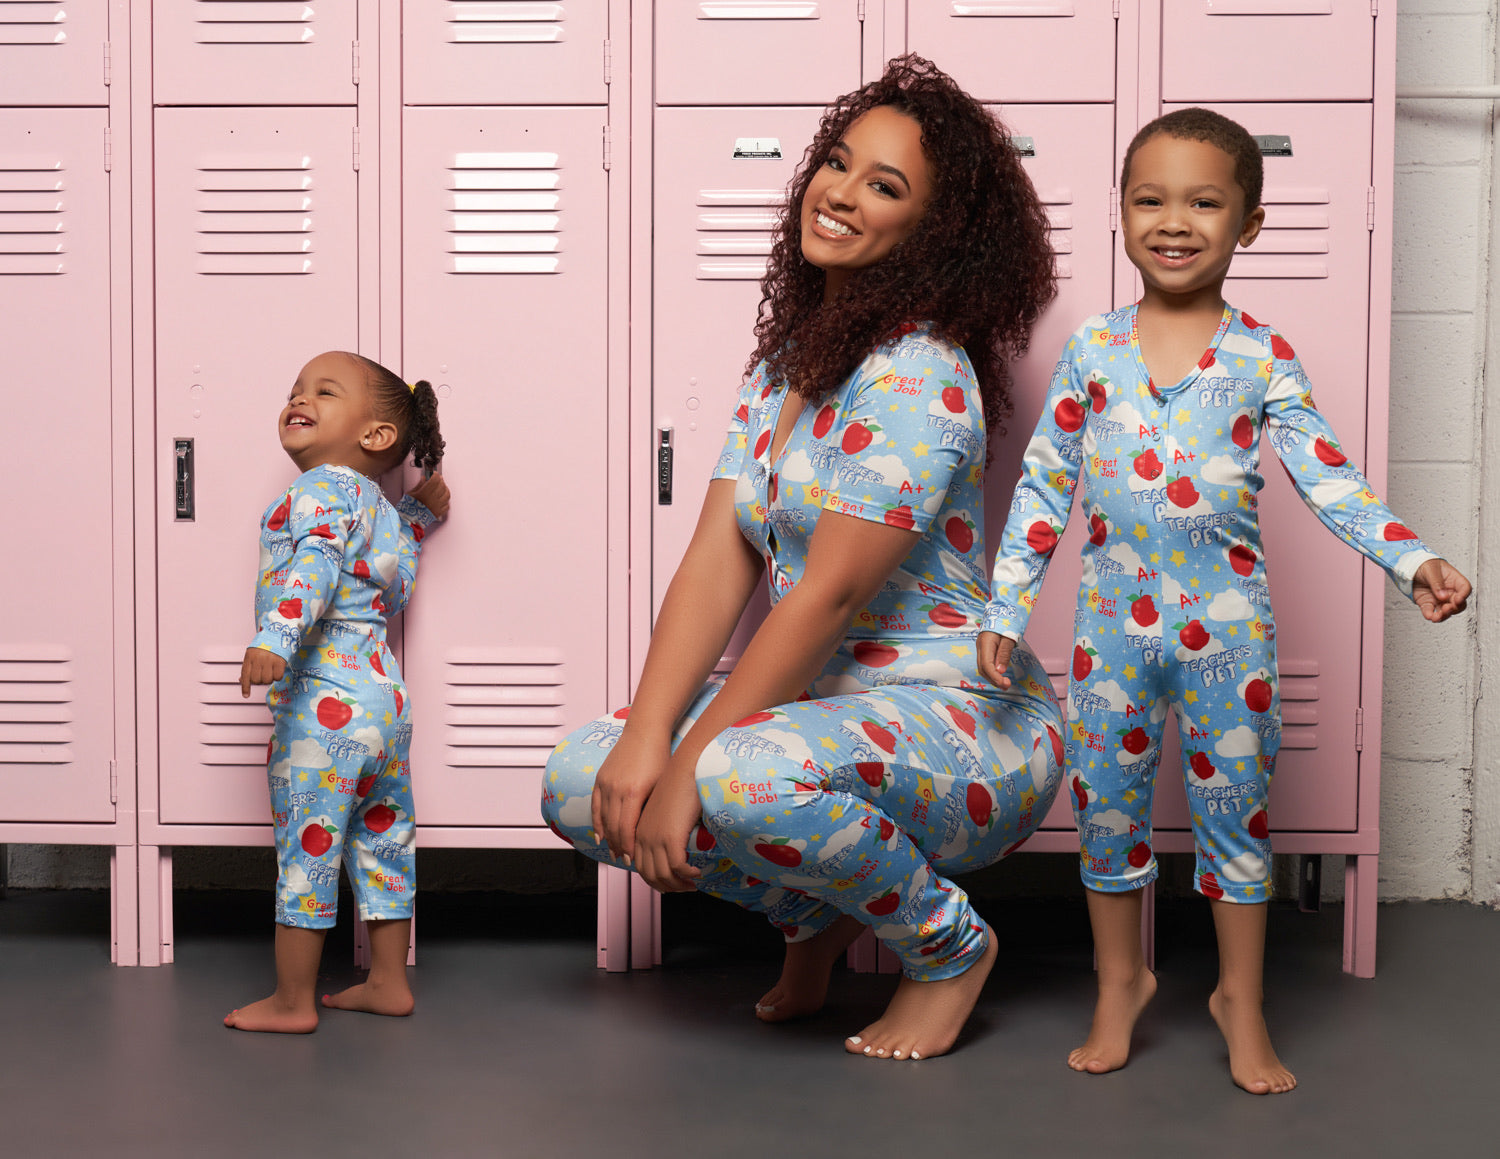 Image of a small toddler standing, with a curly haired adult woman squatting, with an older child standing on their tip-toes. The background is a line of pink lockers.